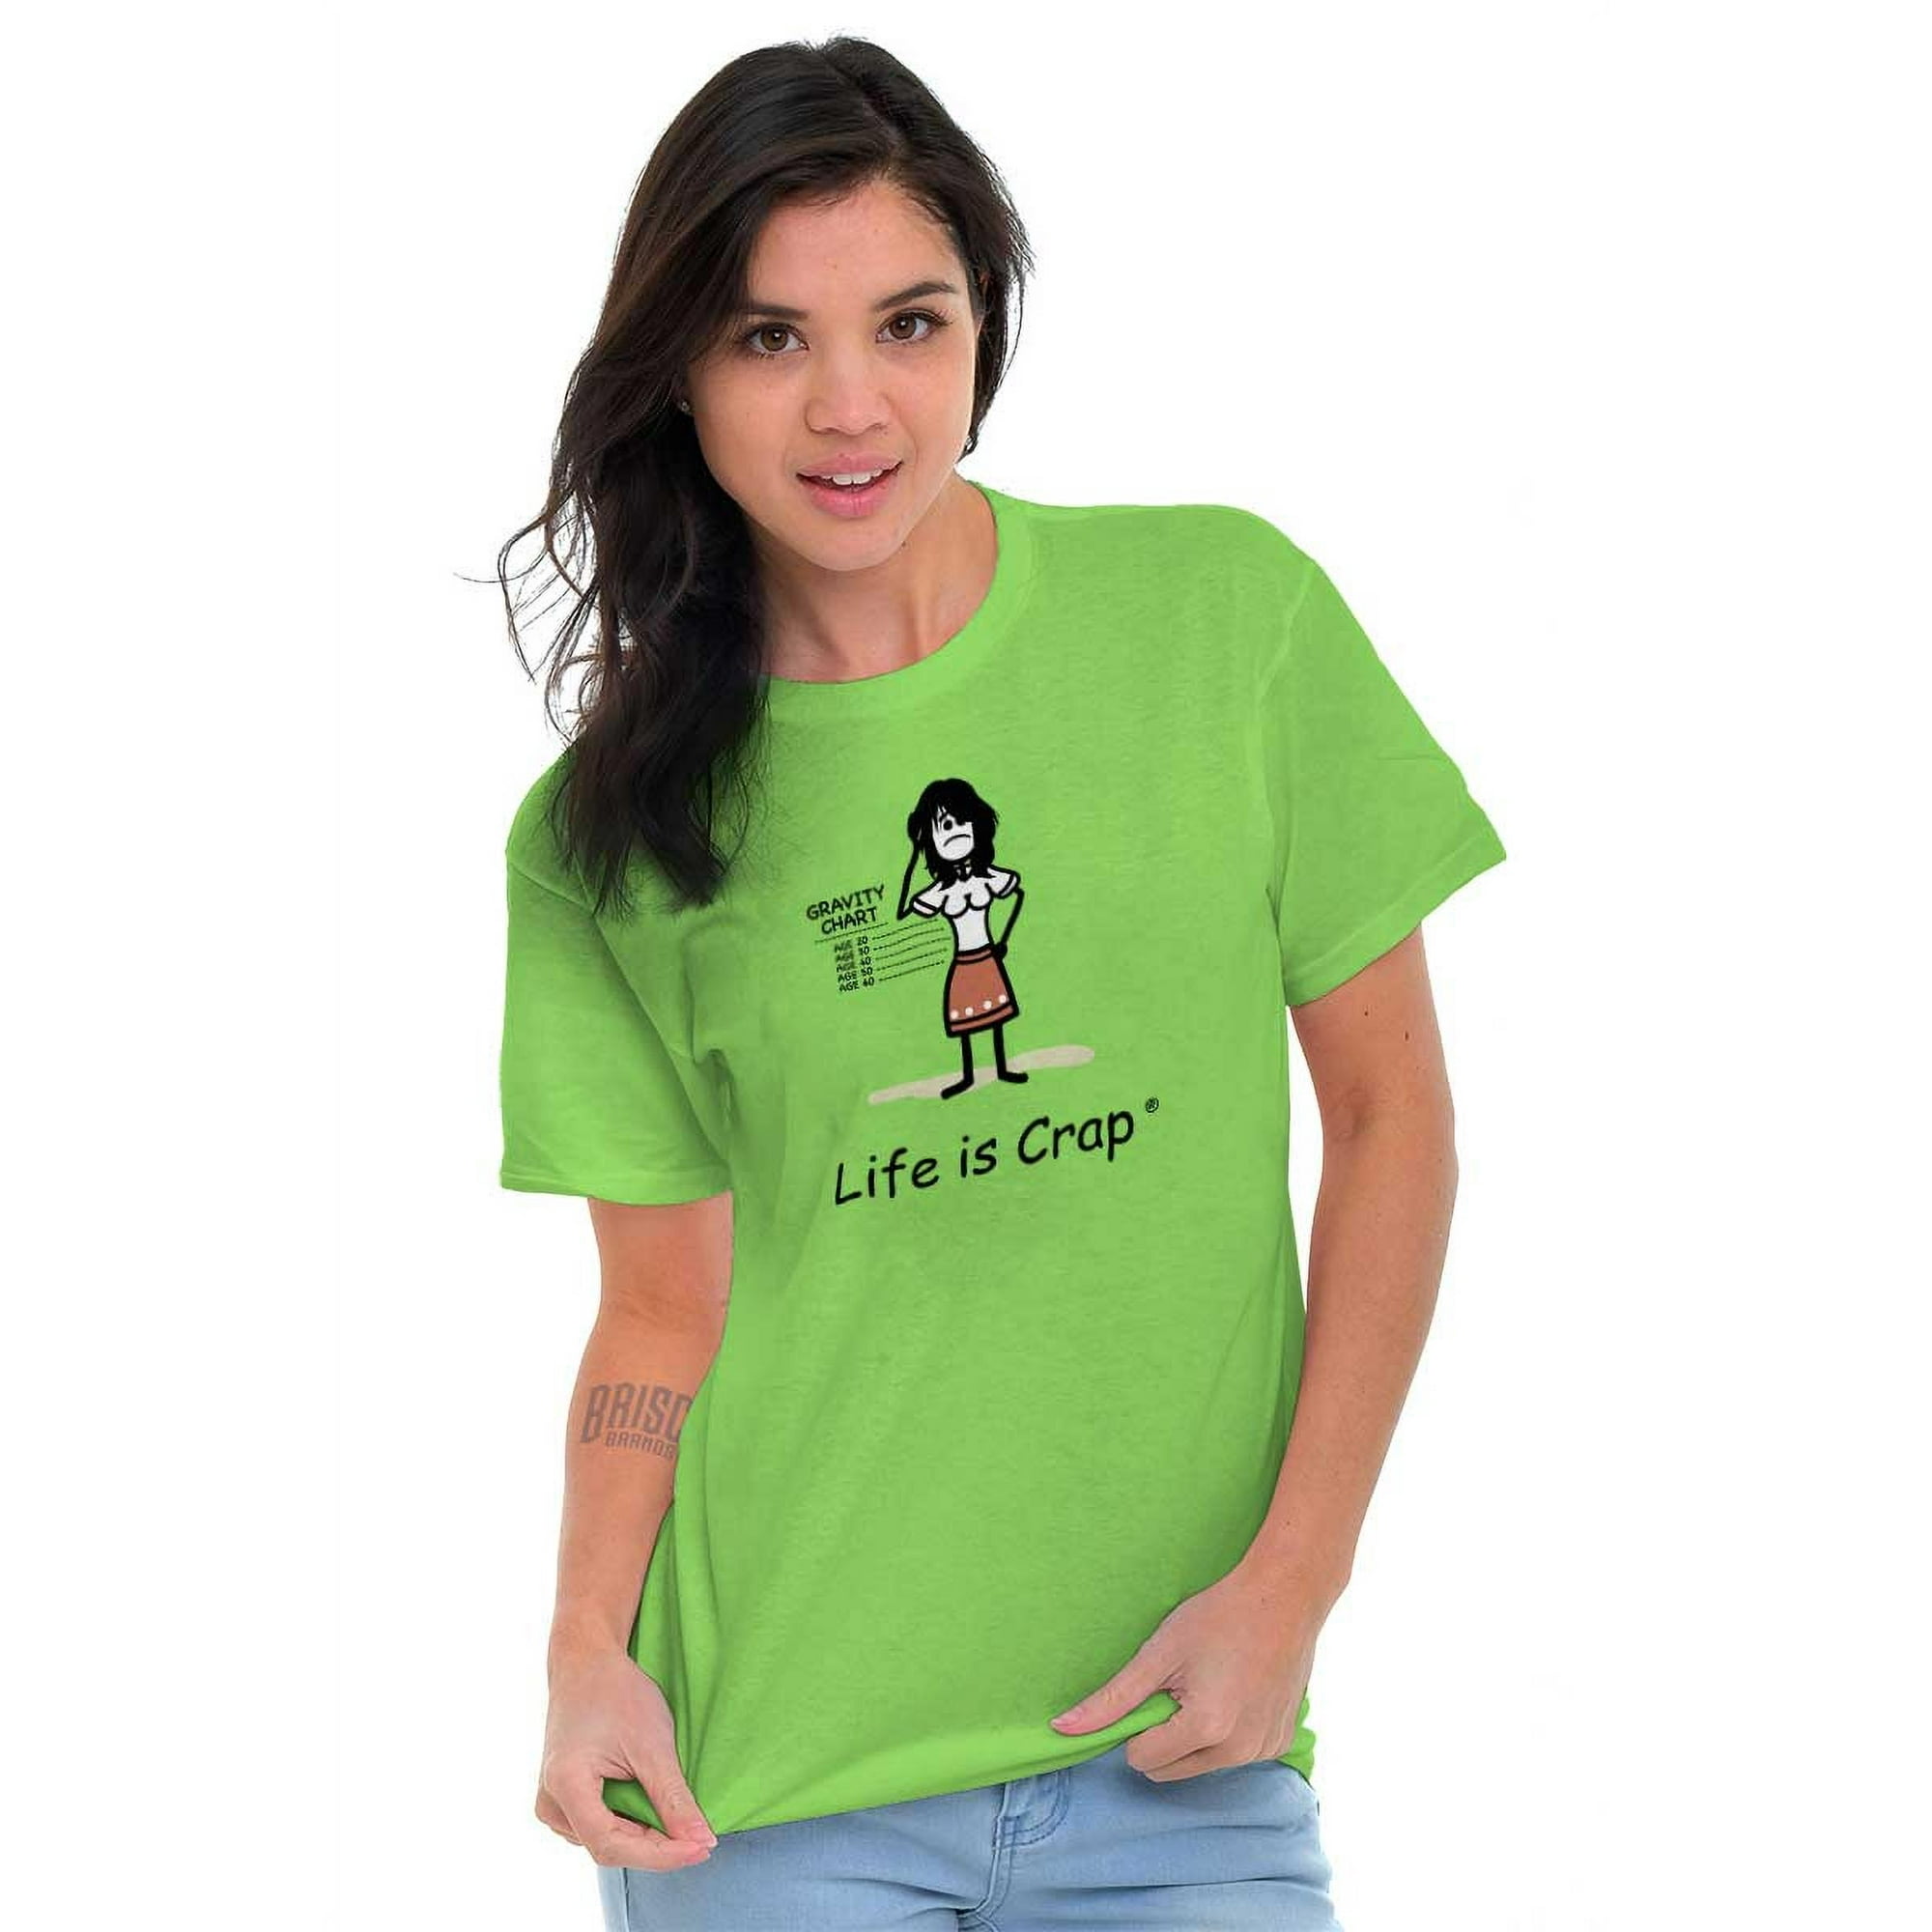 Saggy Boobs Funny Mom Humor Mors Day Womens Graphic T Shirt Tees Brisco Brands, Women's, Size: Medium, Green